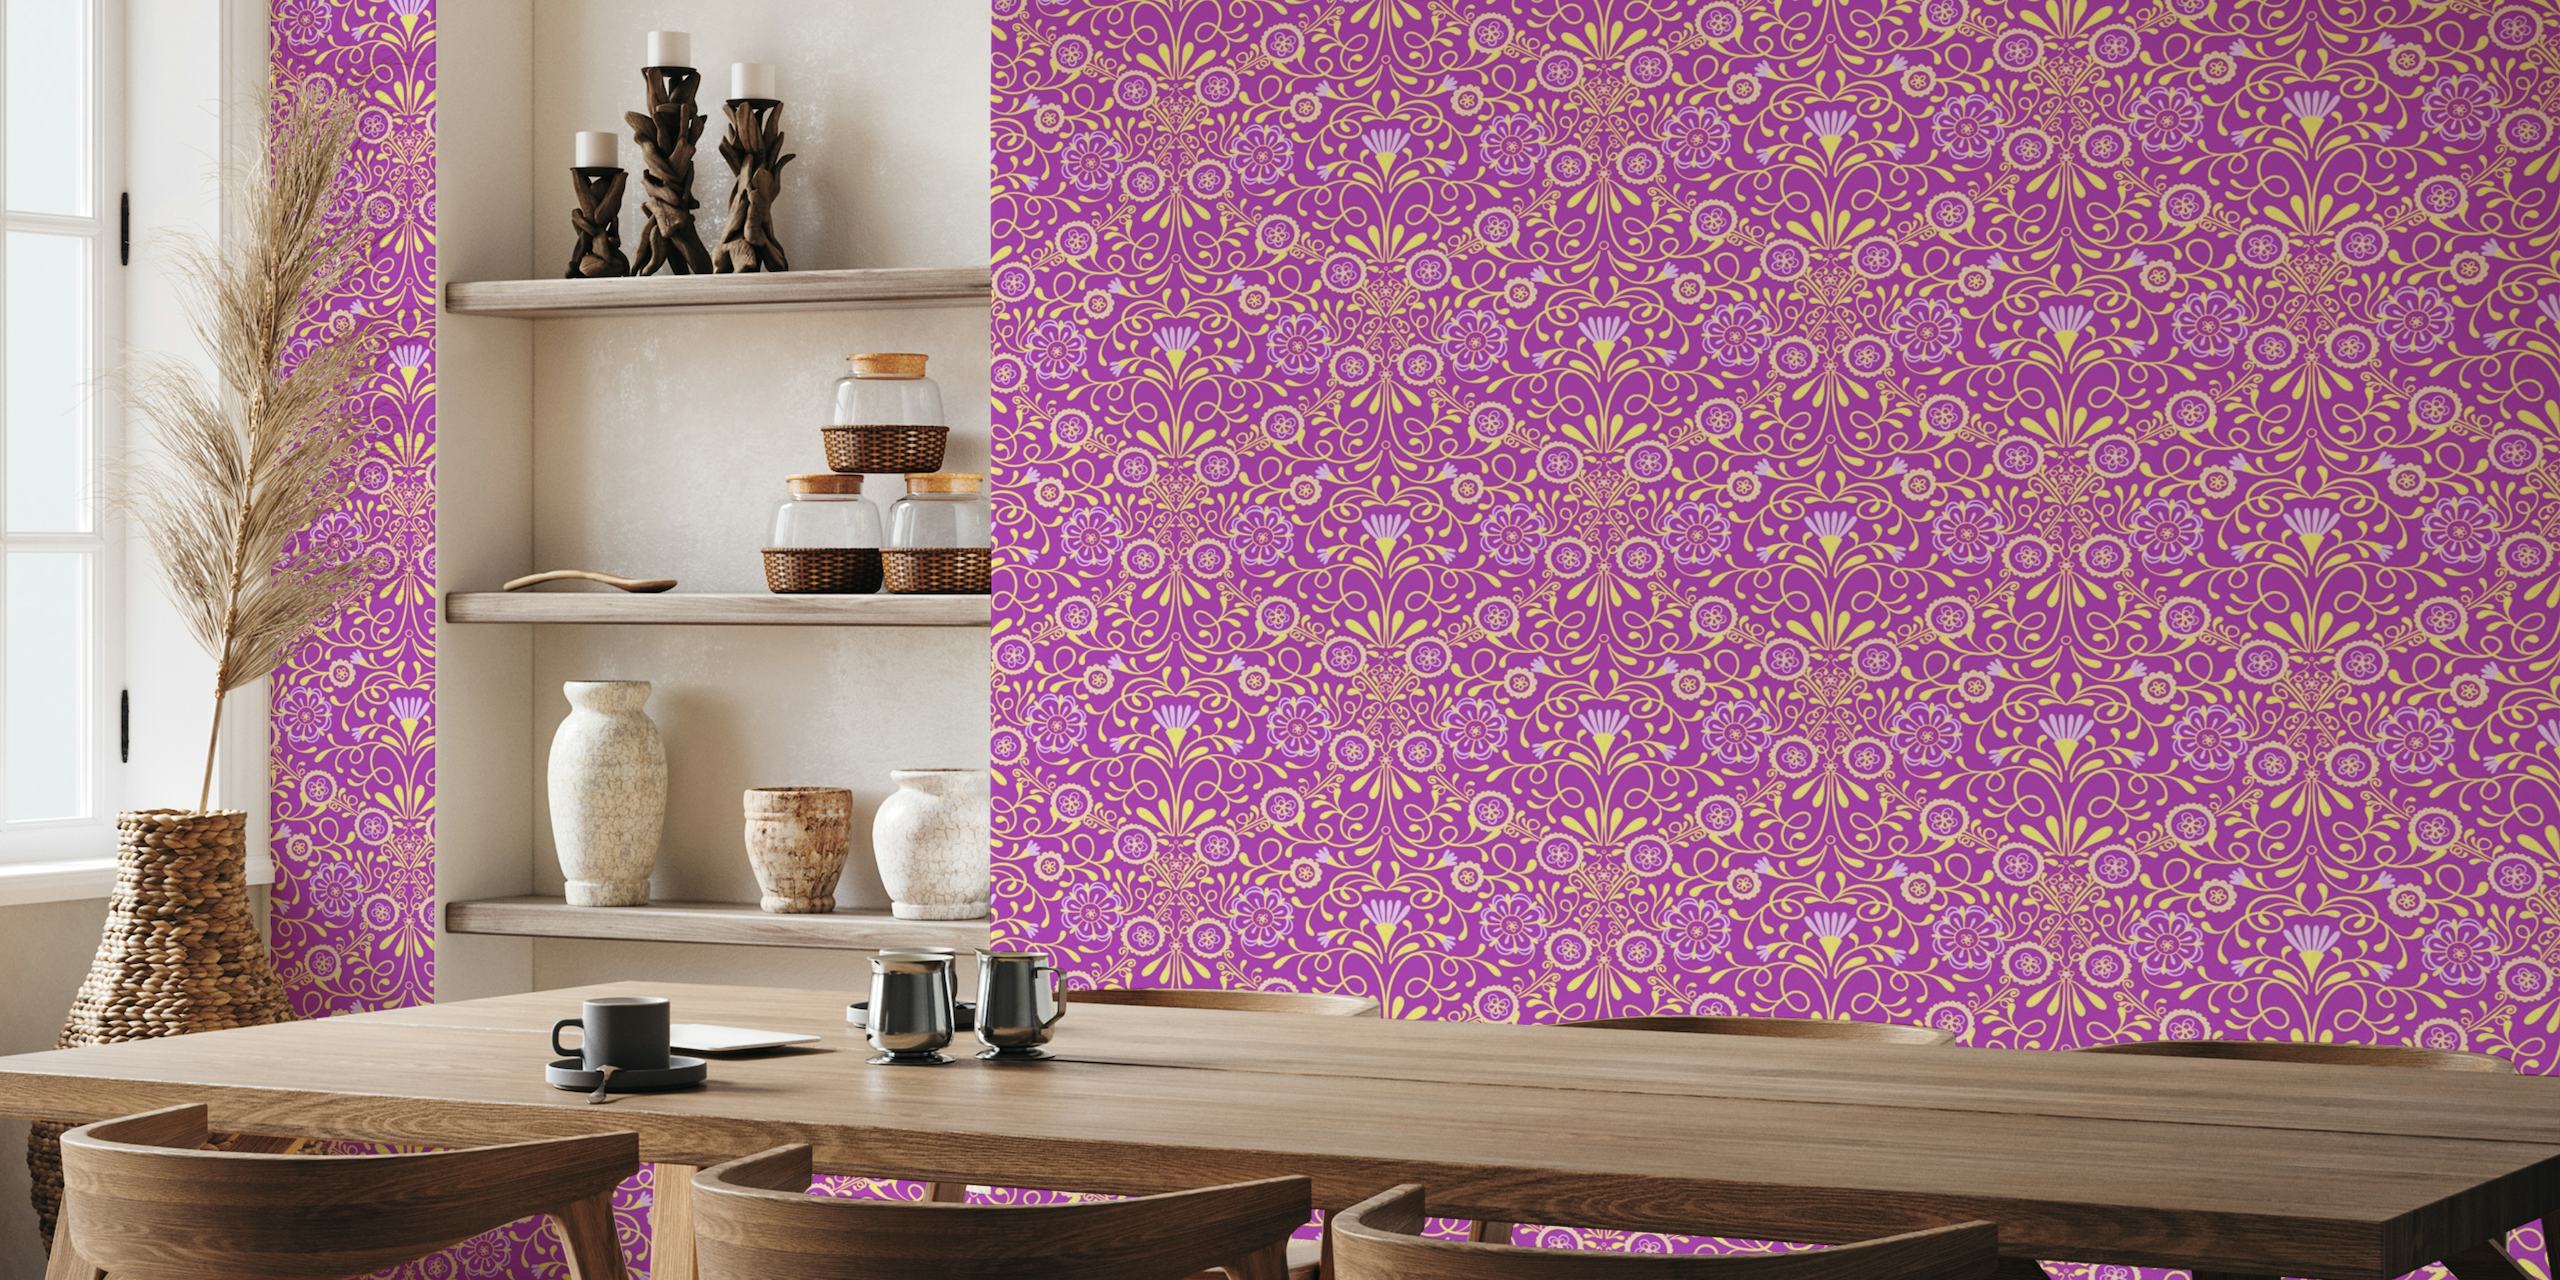 Tuscan Tile in Magenta, Yellow, and Purple tapete